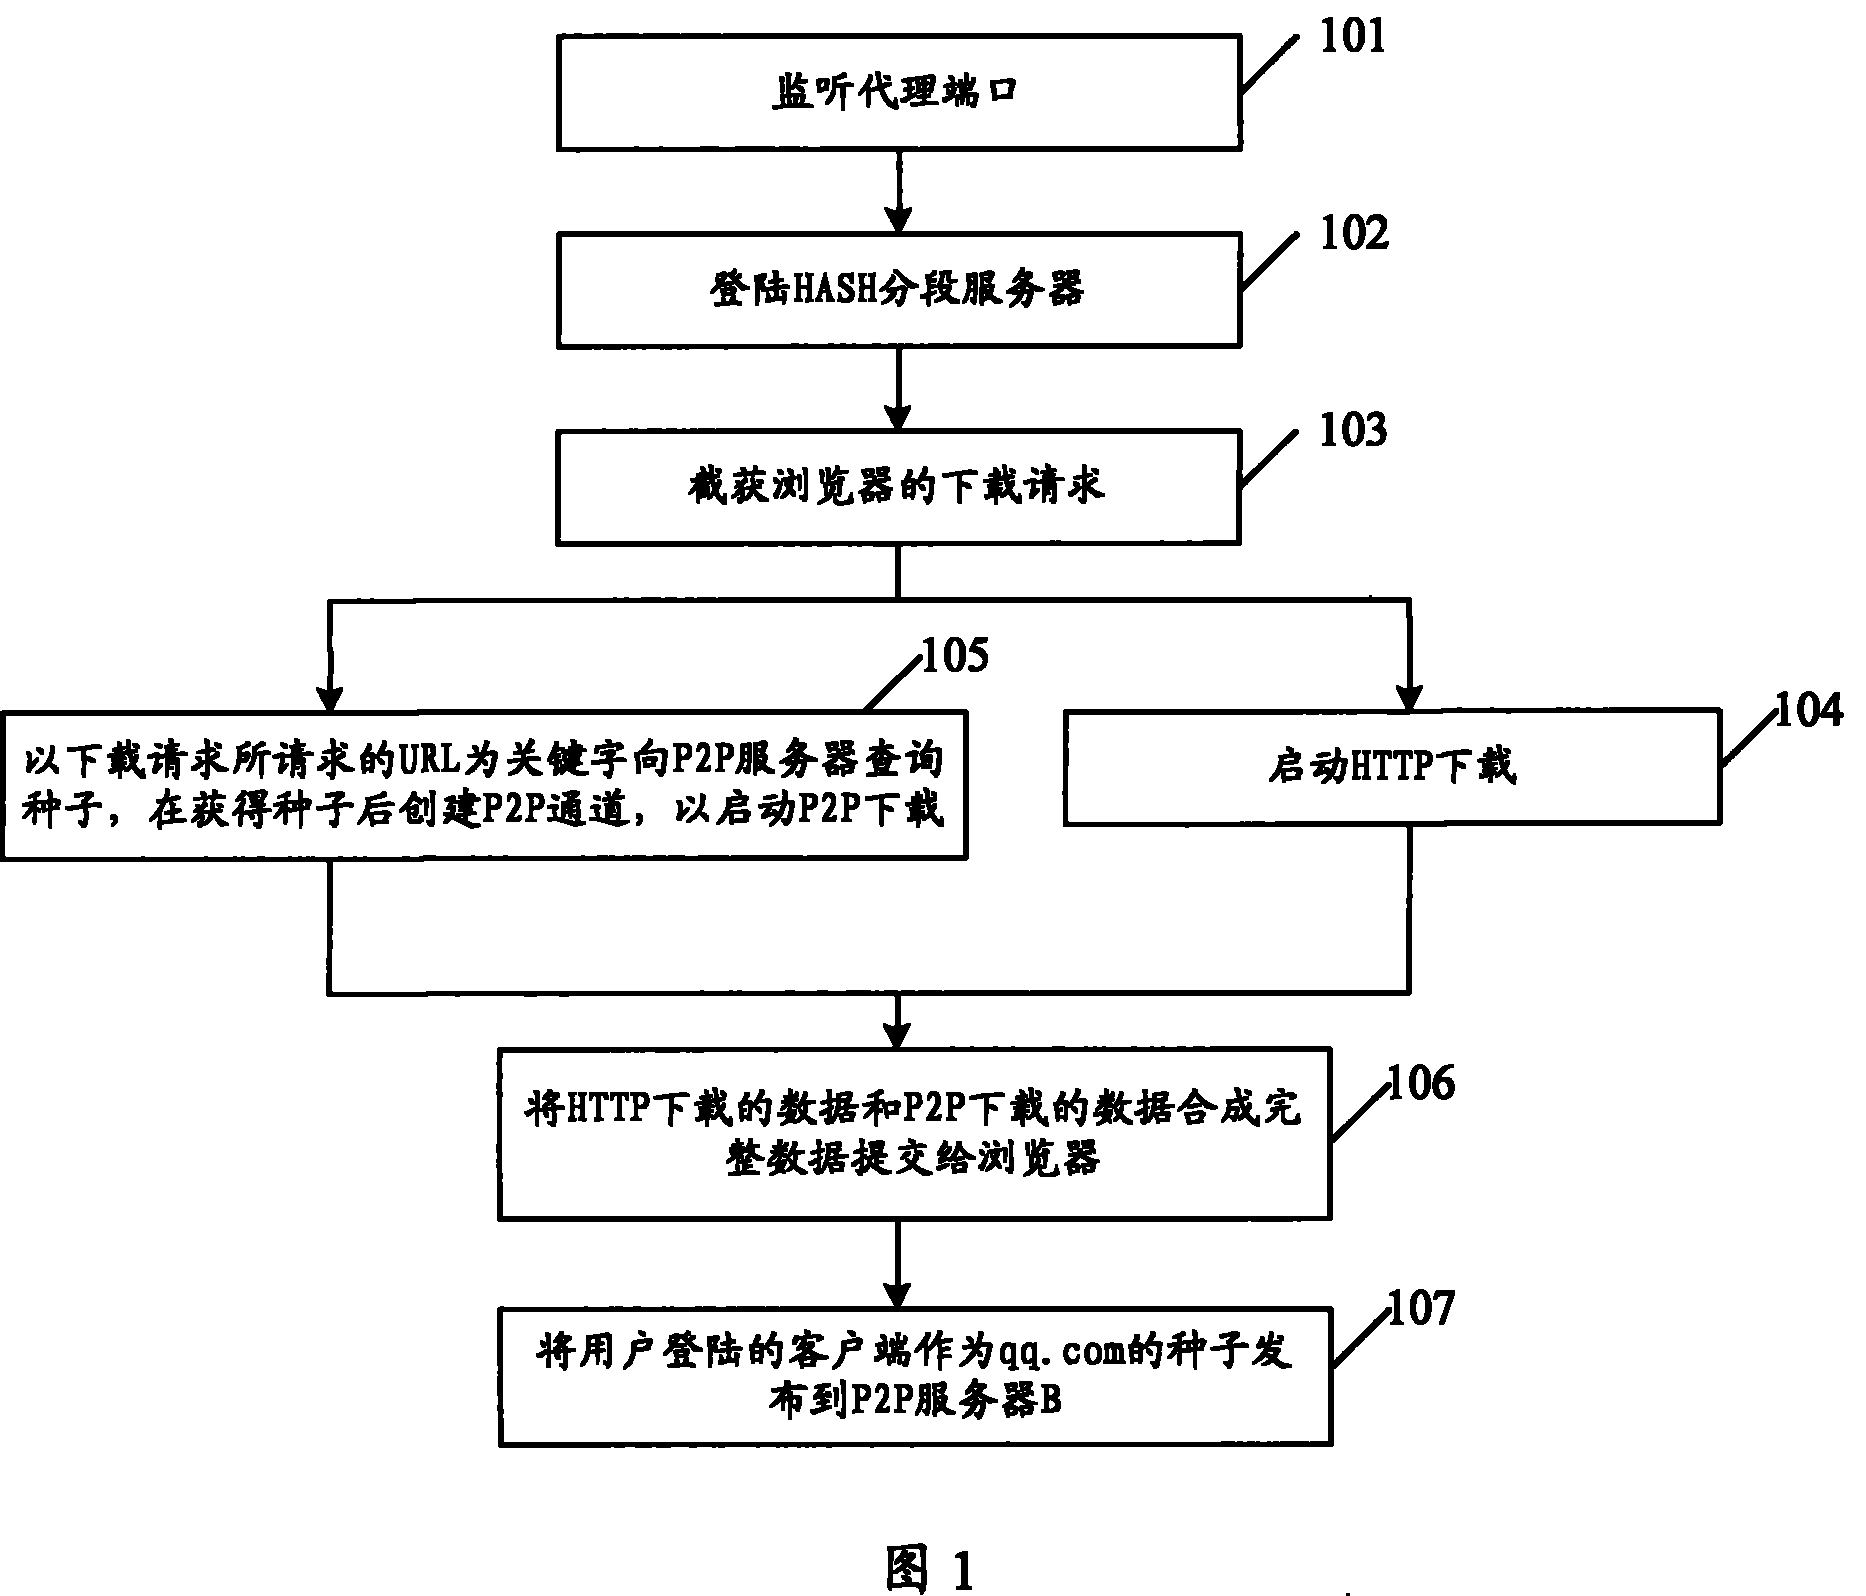 Method and device of accelerating download of web page contents